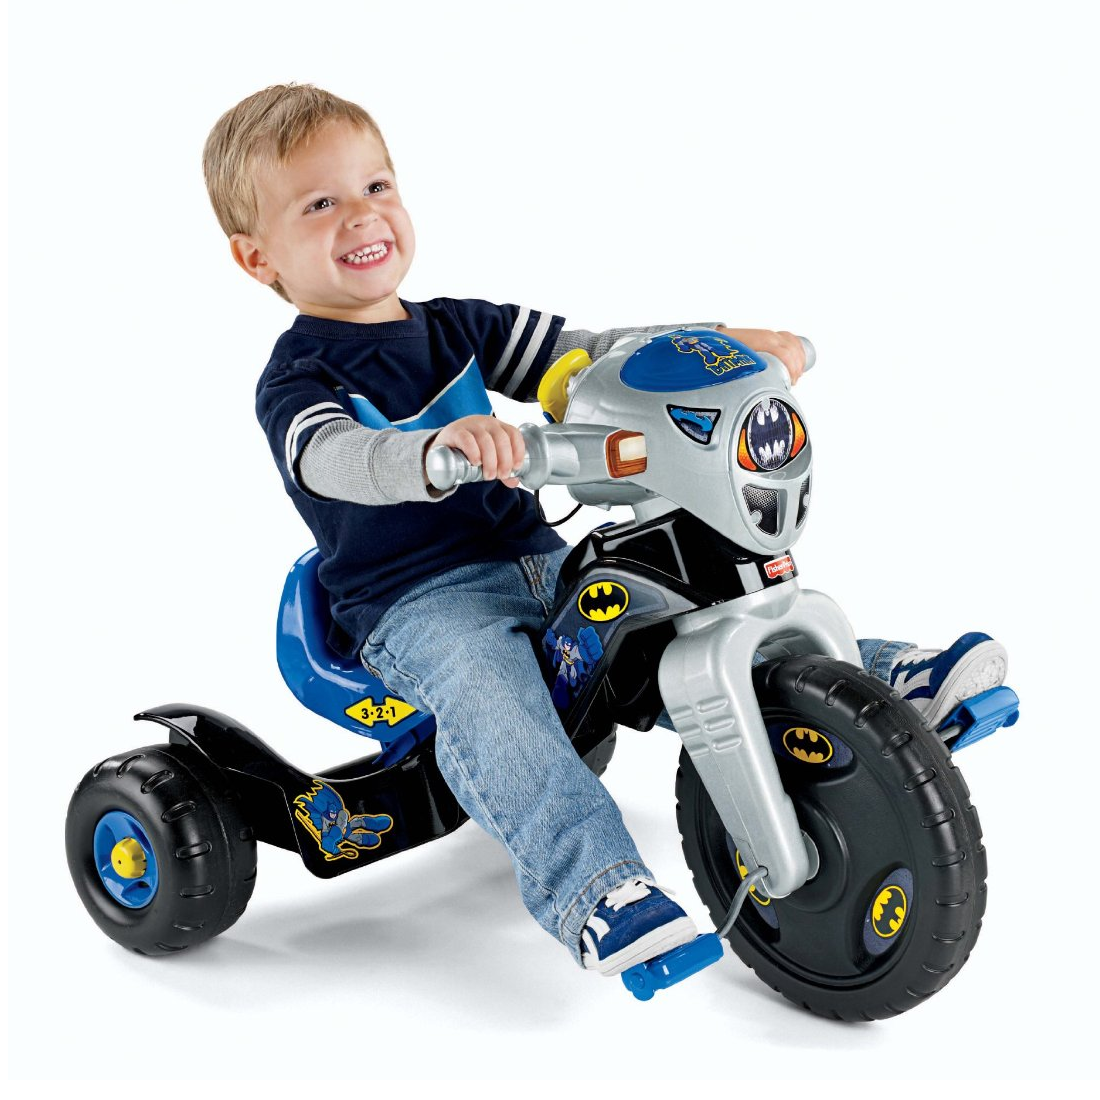 Fisher-Price DC Super Friends Batman Lights And Sounds Trike Only $37.64 on Amazon!